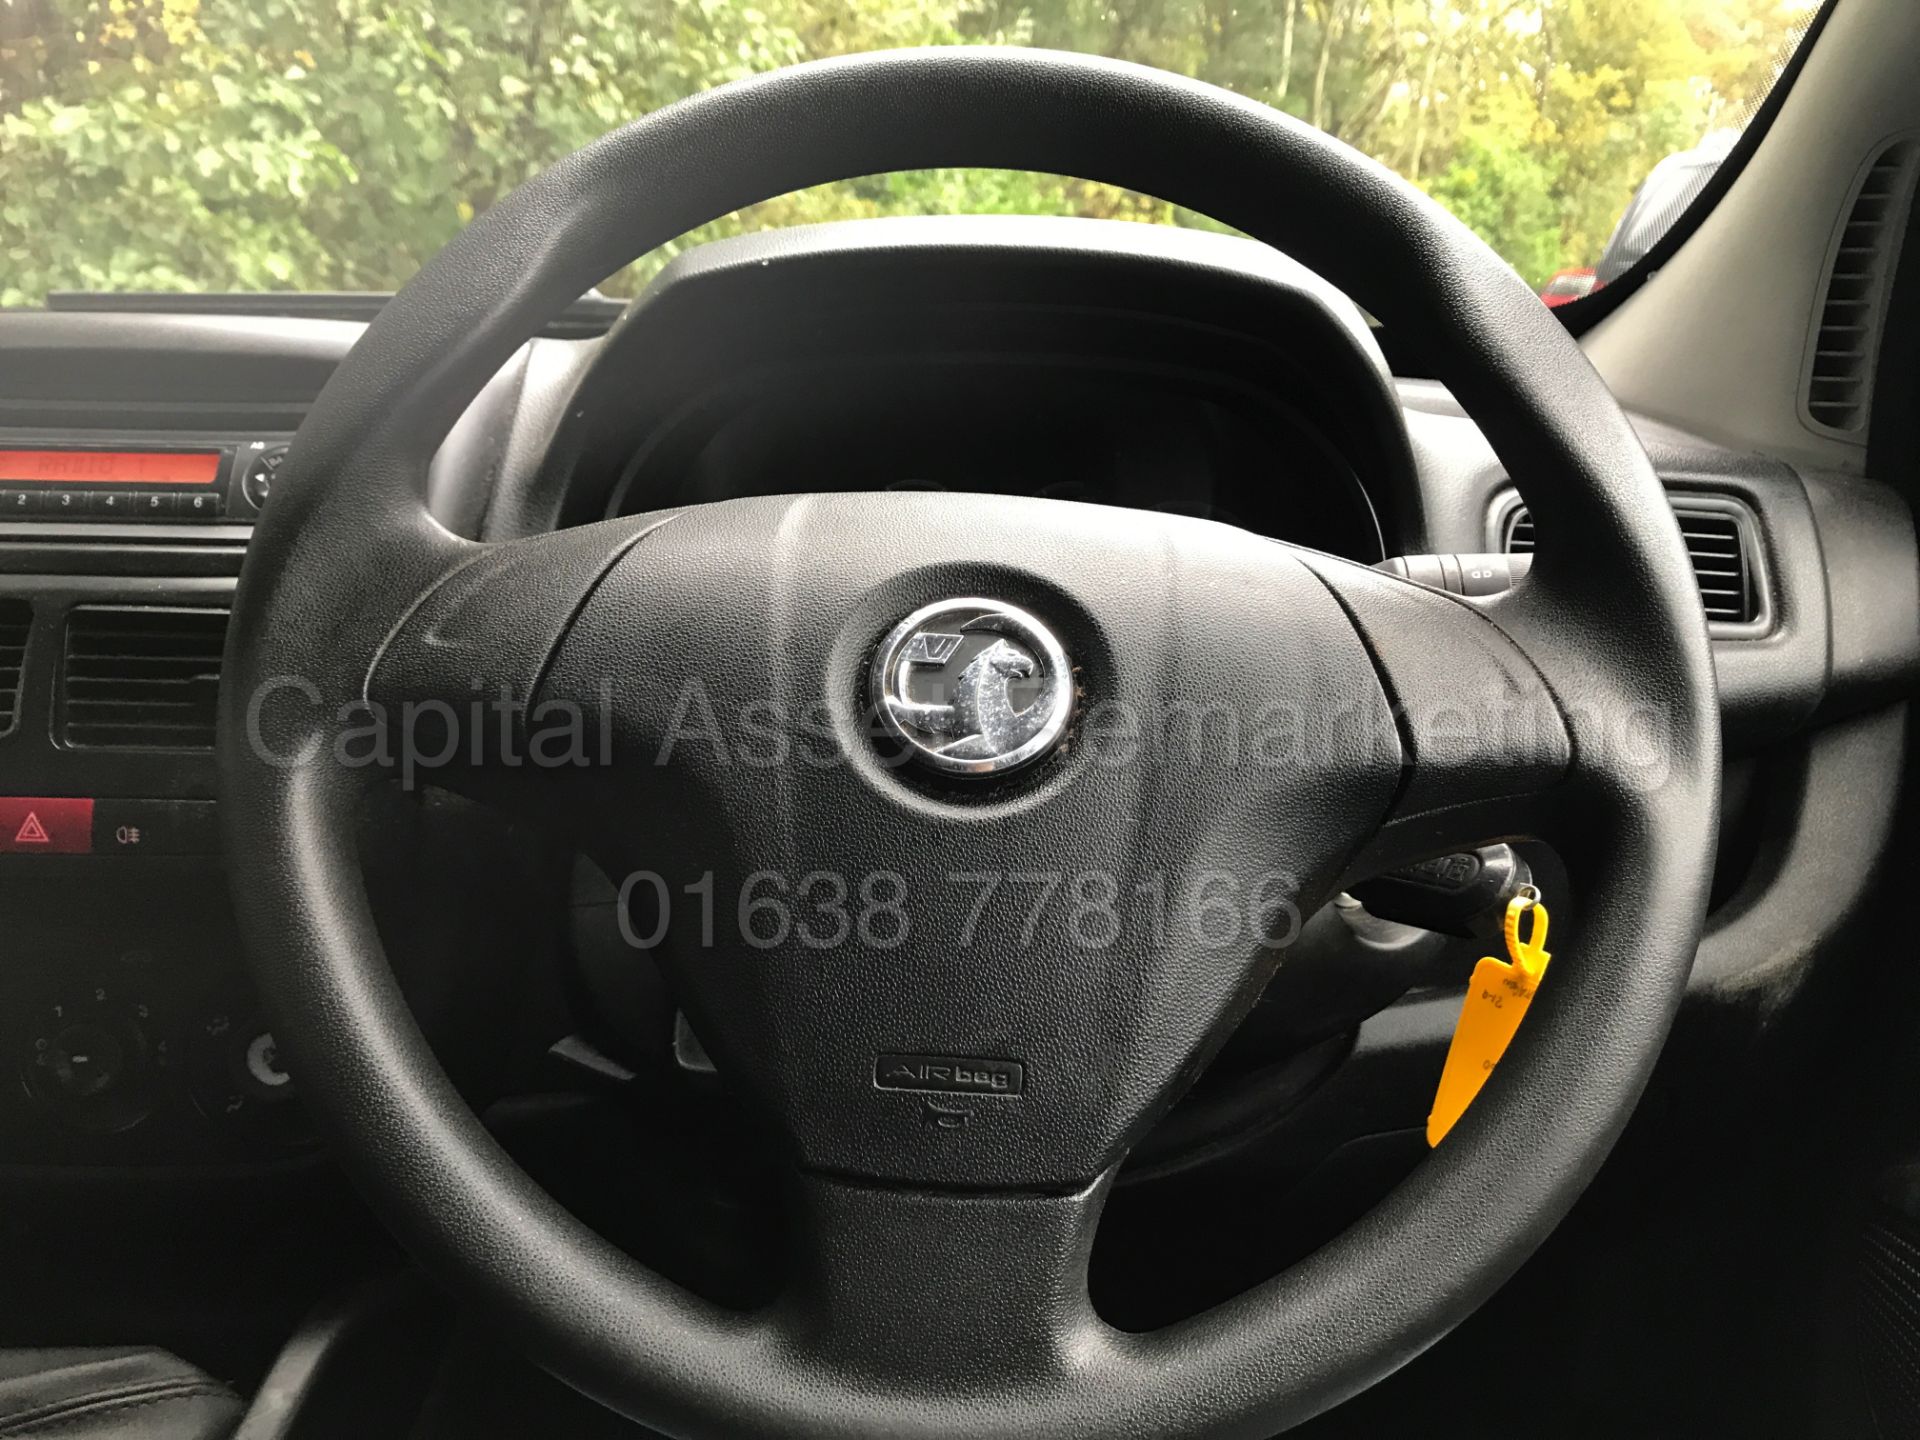 VAUXHALL COMBO 2000 L1H1 (2015 MODEL) 'CDTI - 90 BHP' (1 FORMER COMPANY OWNER FROM NEW) *50 MPG+* - Image 23 of 25